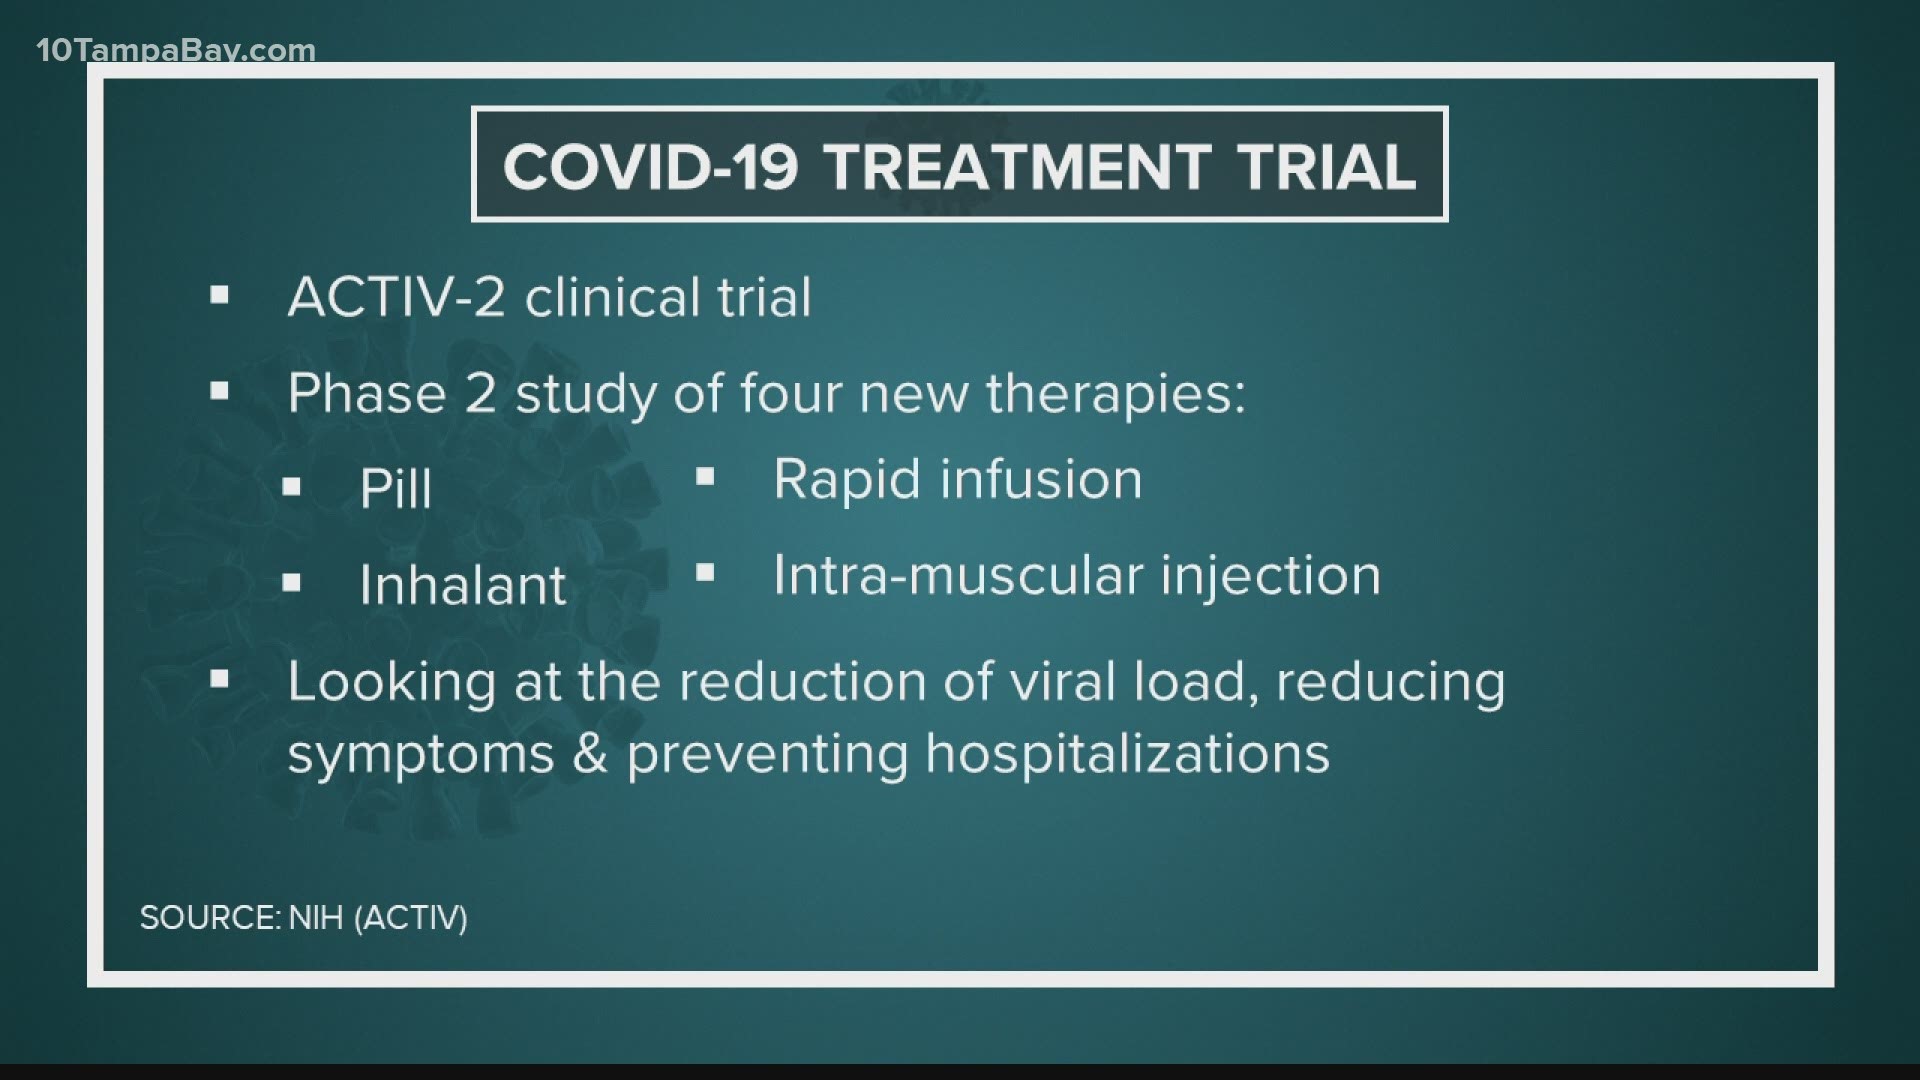 MOORE Clinical Research is looking for people who have COVID-19 to participate in a trial studying four new therapies.